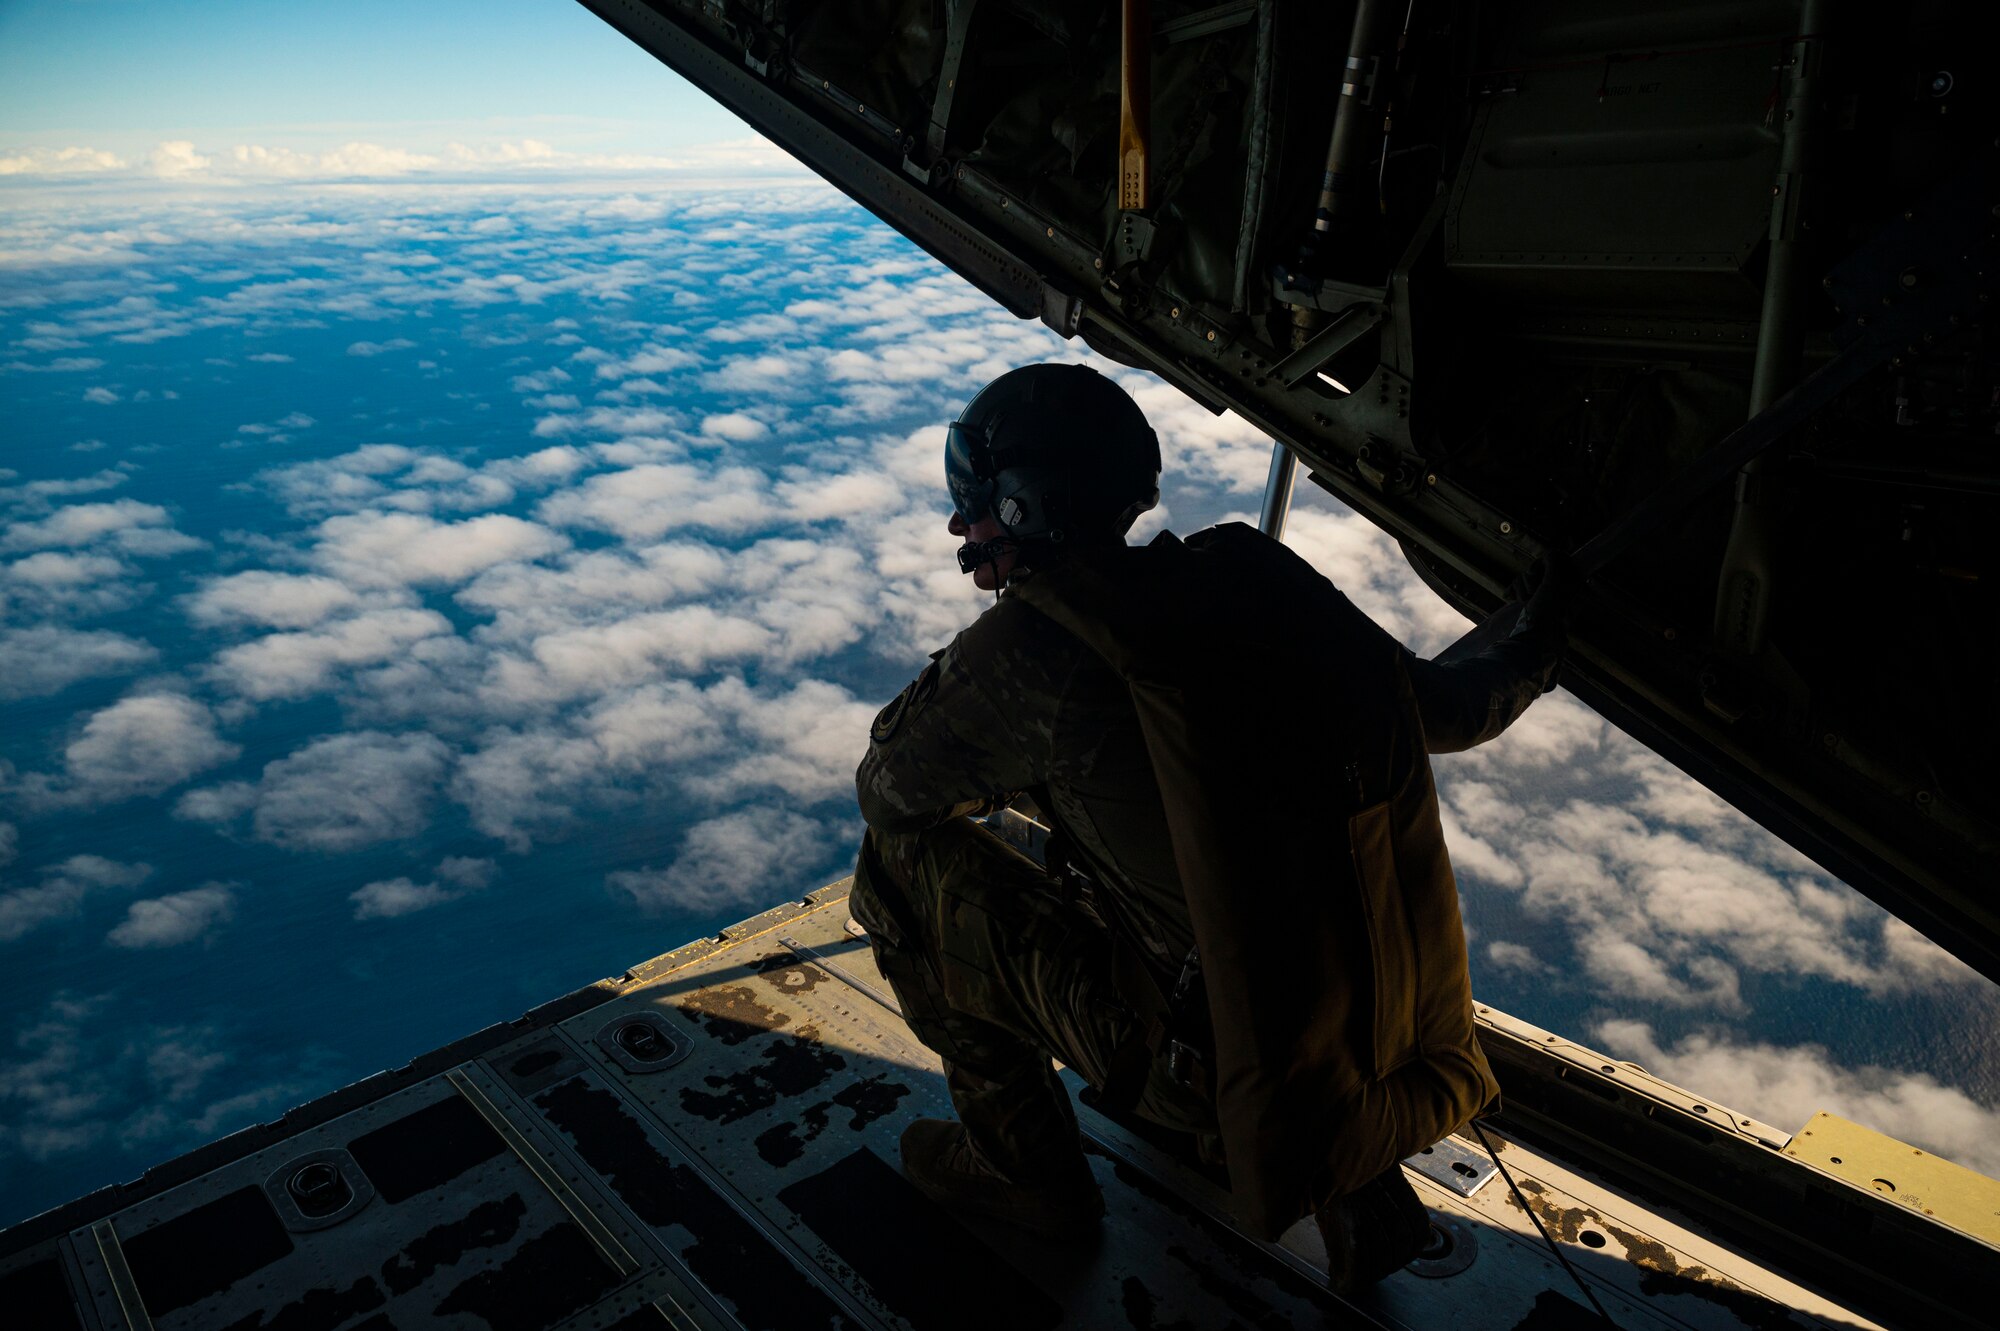 Airman looks out over ocean.